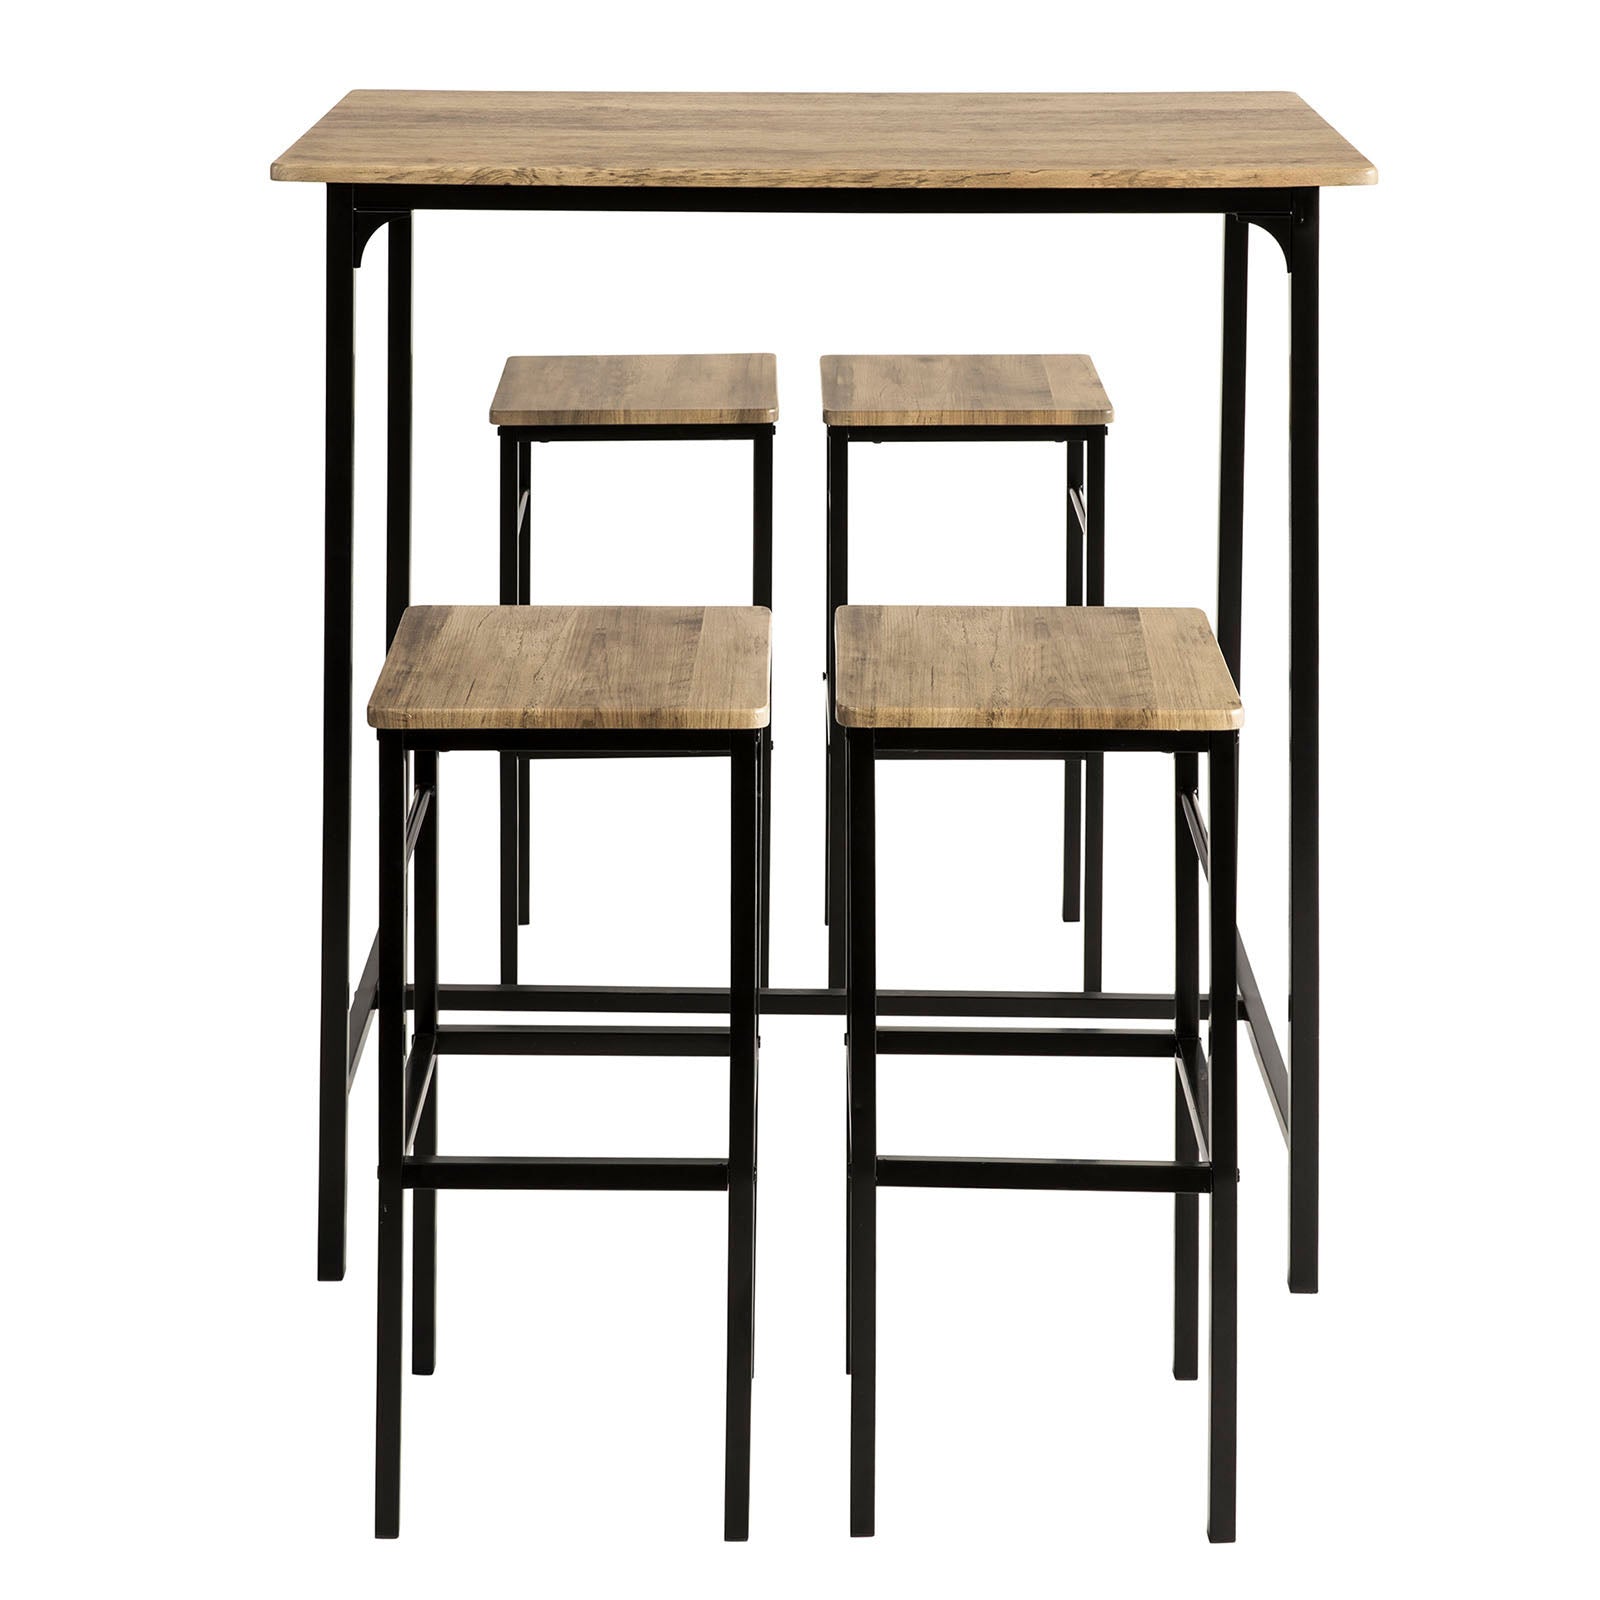 SoBuy OGT11-XL,Bar Set-1 Bar Table and 4 Stools,Home Kitchen Breakfast Table,Kitchen Counter with Bar Chairs